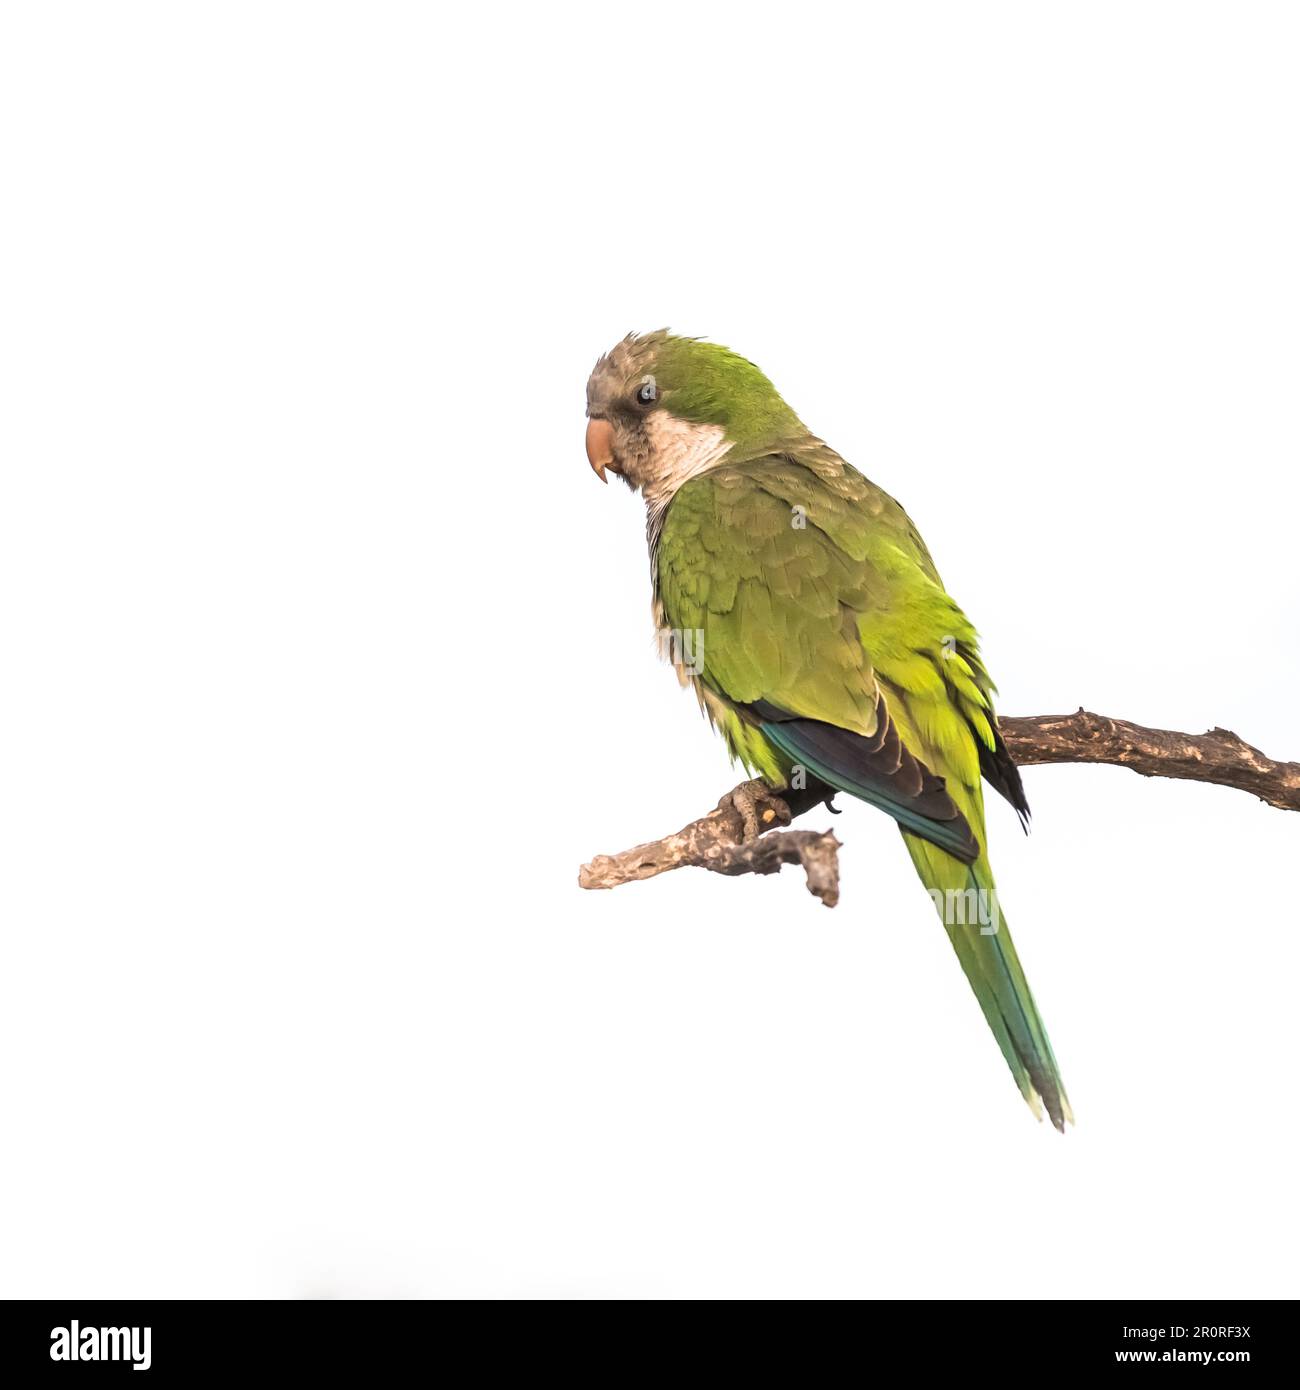 Monk parakeet, Myiopsitta monachus, in Pampas forest environment, La Pampa province, Patagonia, Argentina. Stock Photo